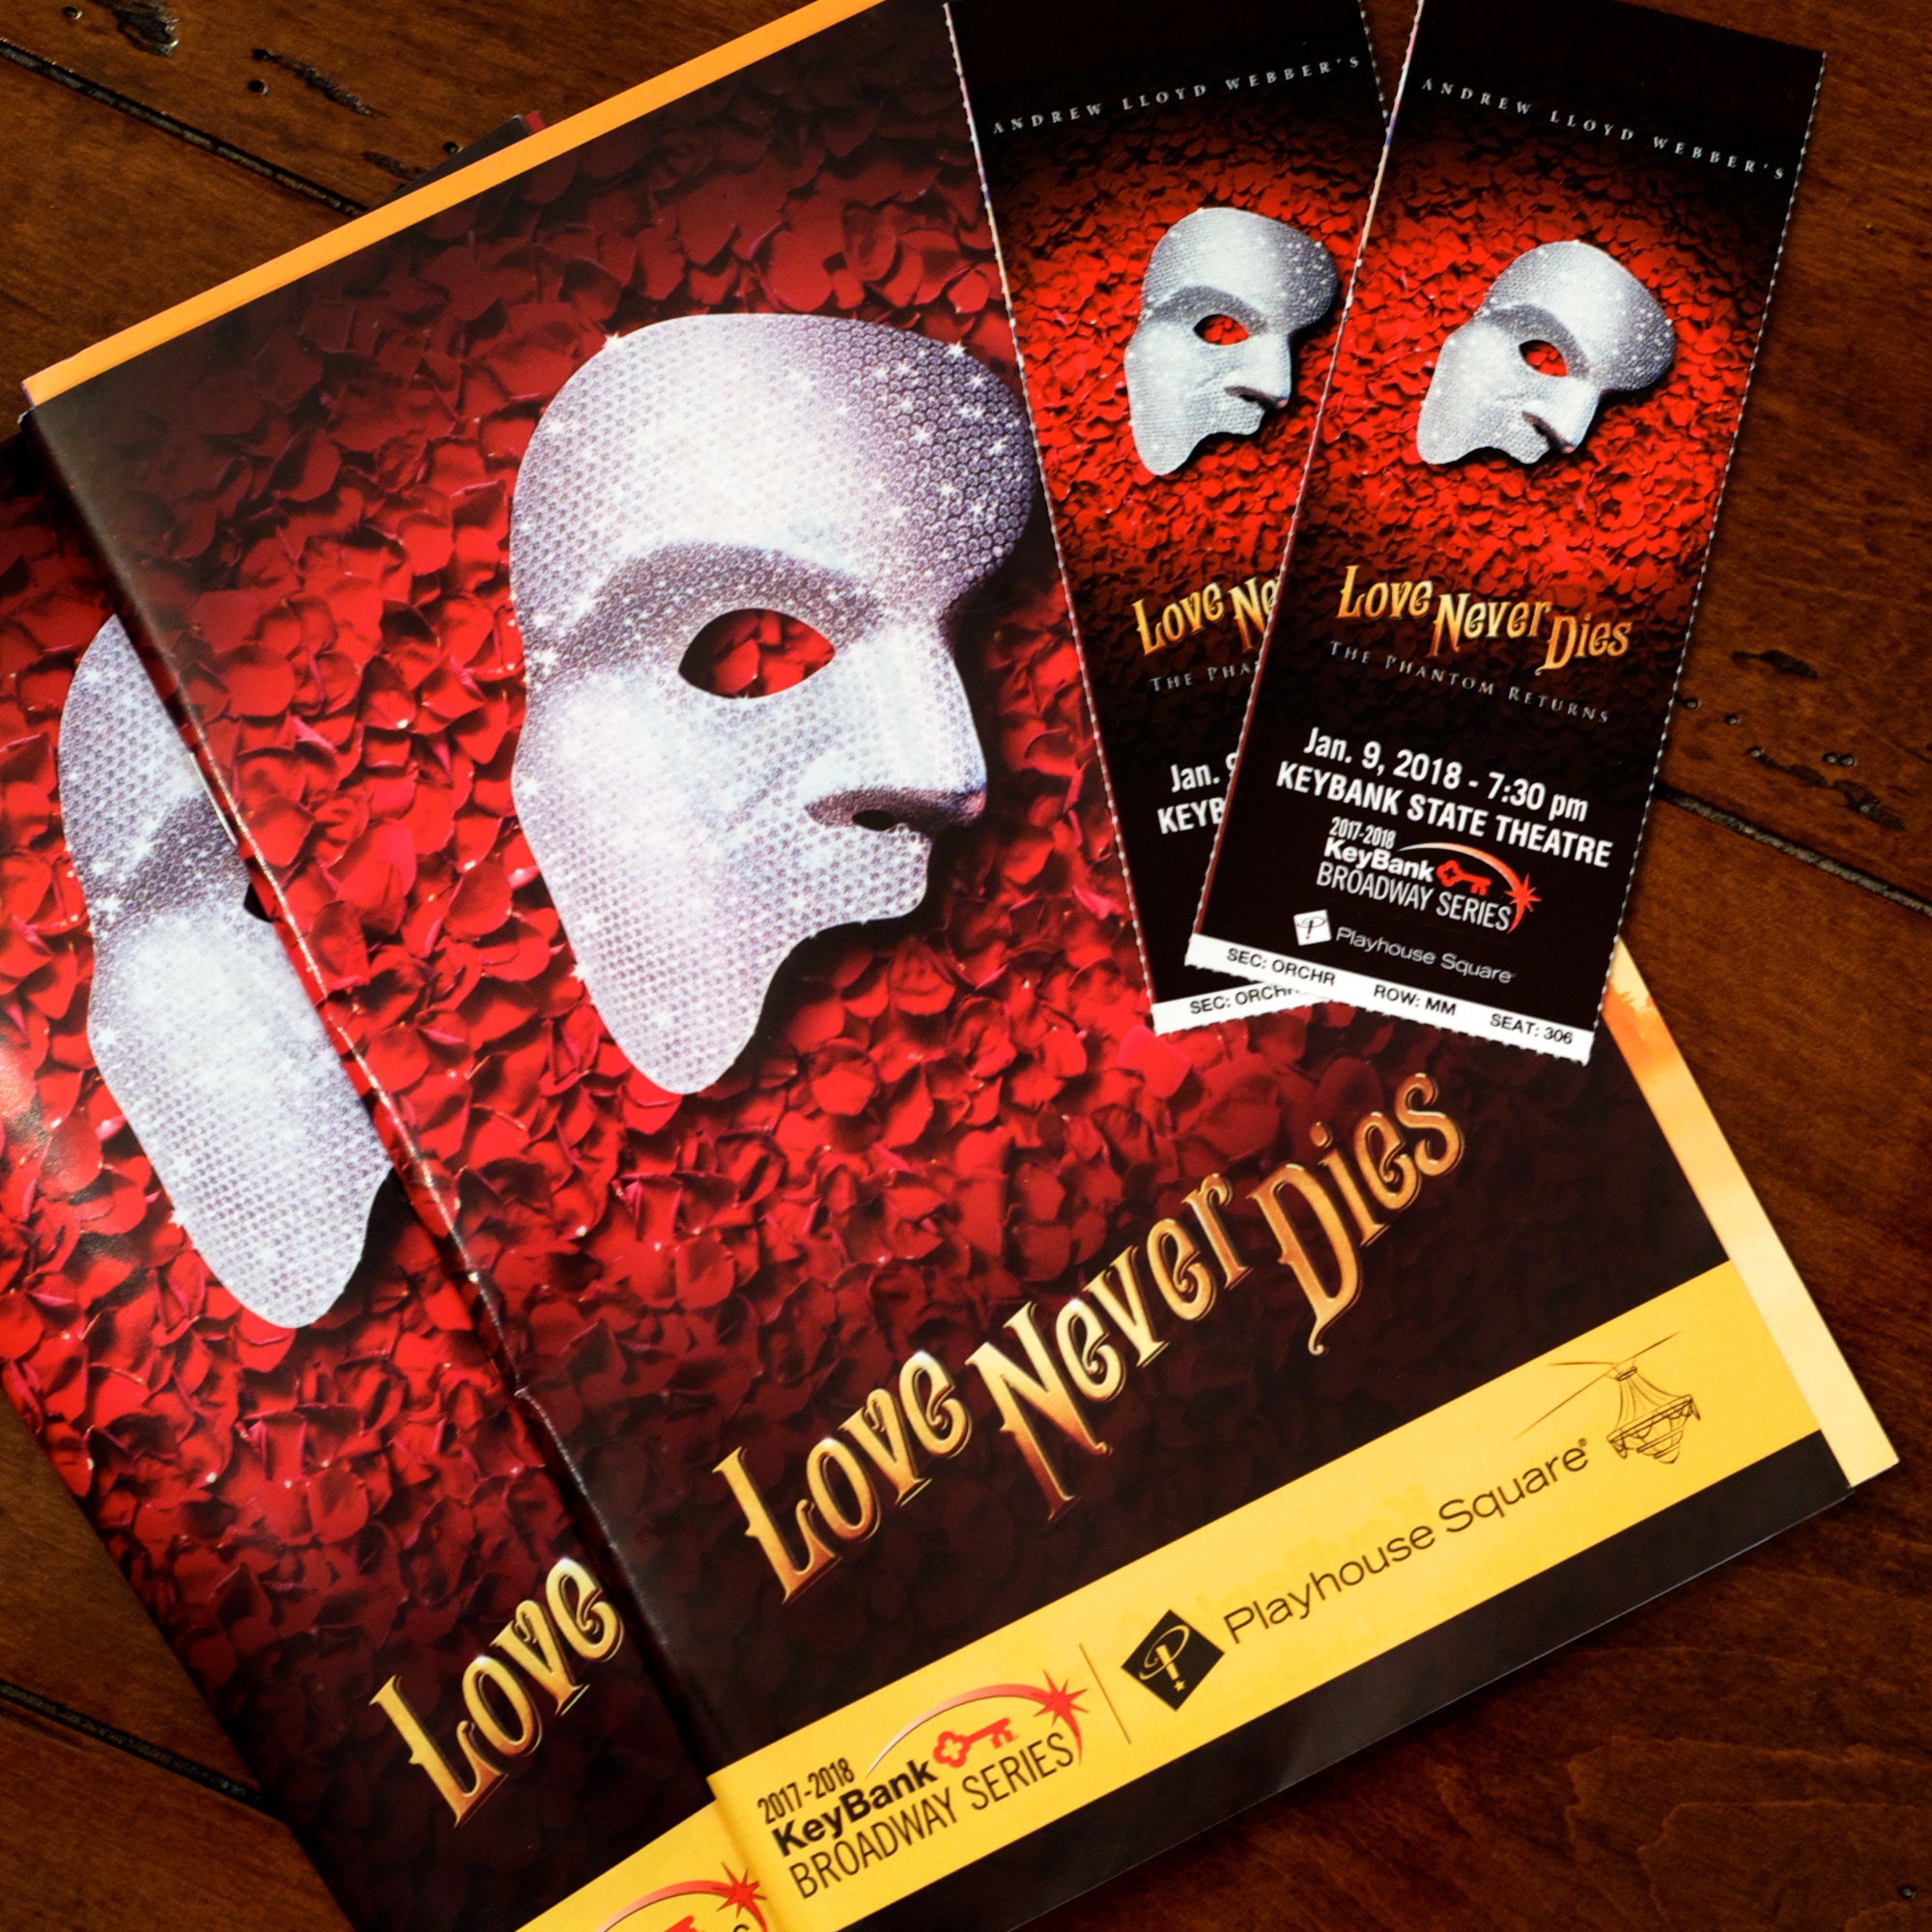 Love Never Dies Playbill and tickets